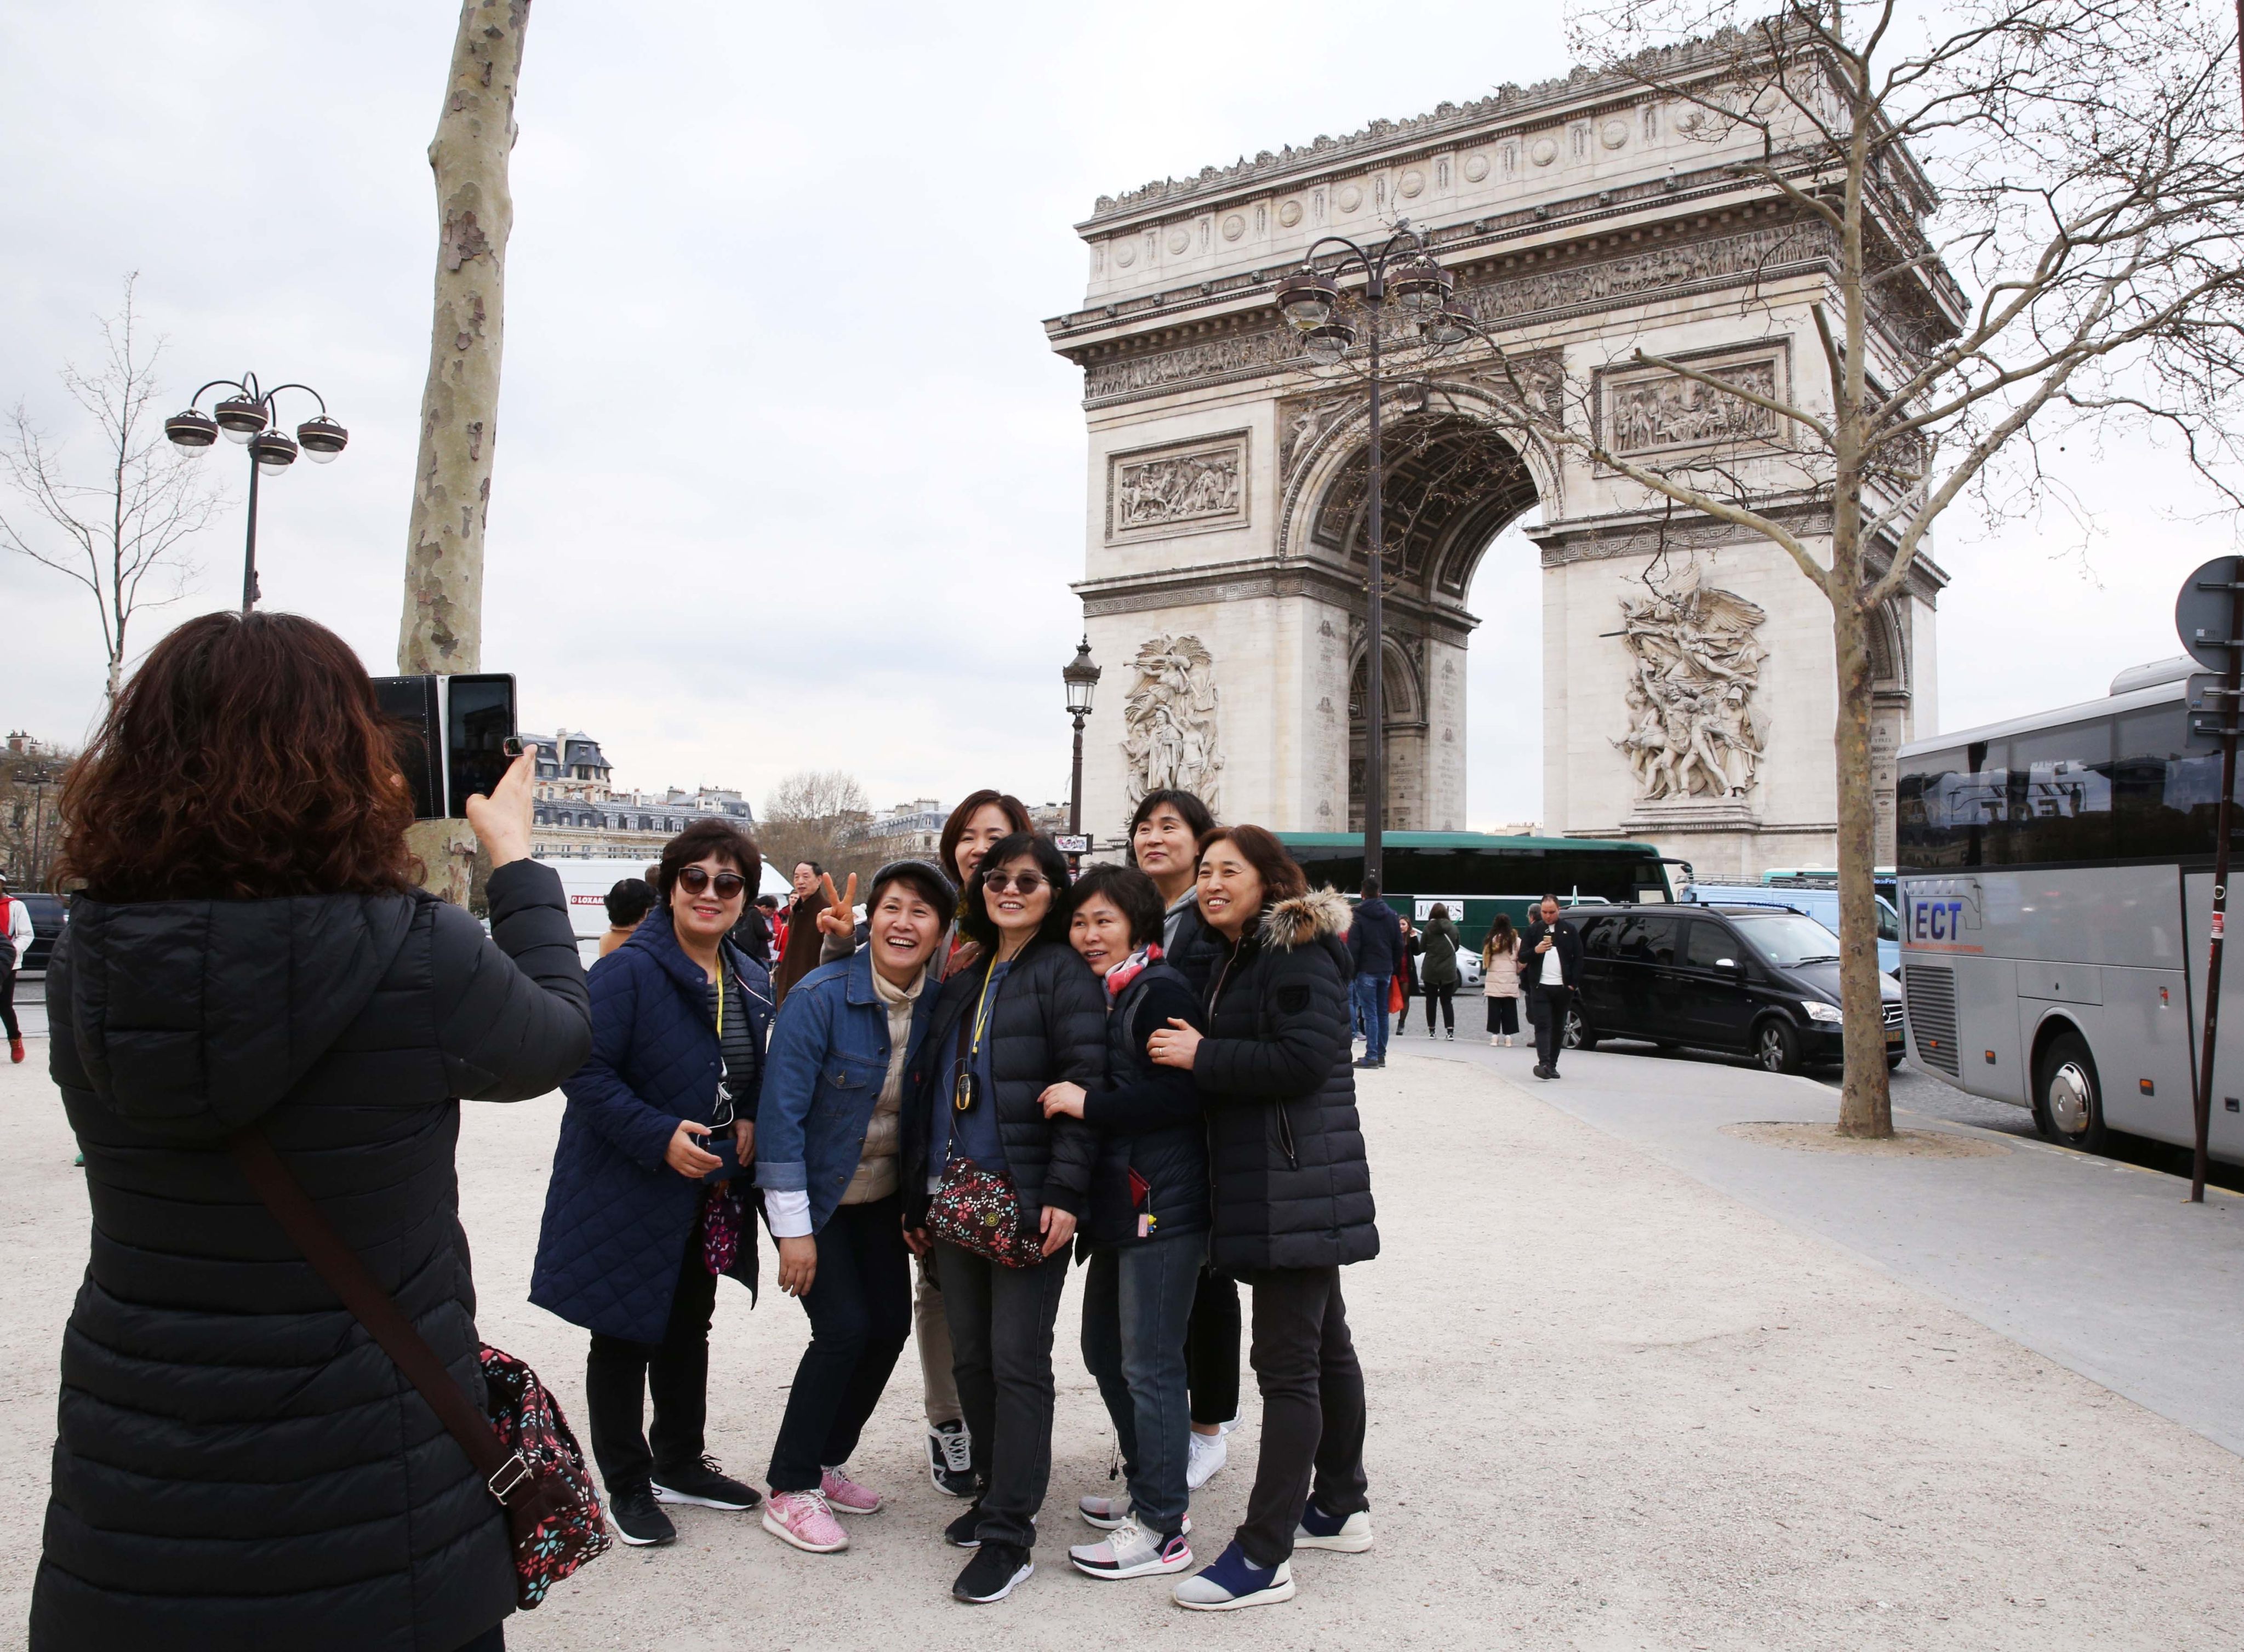 Outbound tourists from China numbered 40.3 million in the first half of 2023, according to market research firm Statista, while 155 million people went abroad in all of 2019. Photo: Xinhua